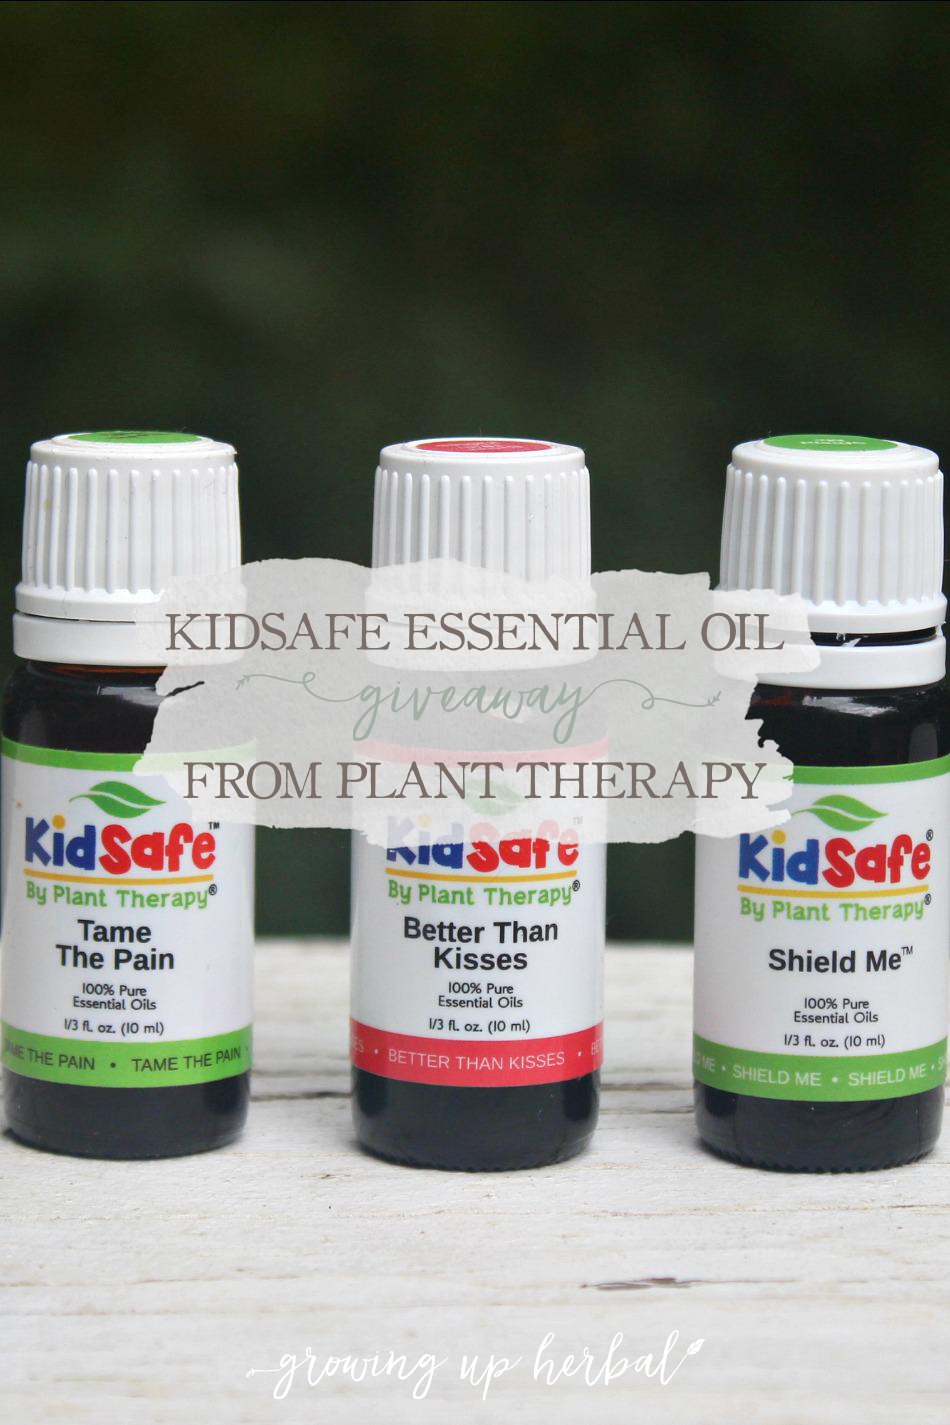 KidSafe Essential Oil Giveaway From Plant Therapy | Growing Up Herbal | Win some oils to use safely on your kiddos, mama! Enter today!